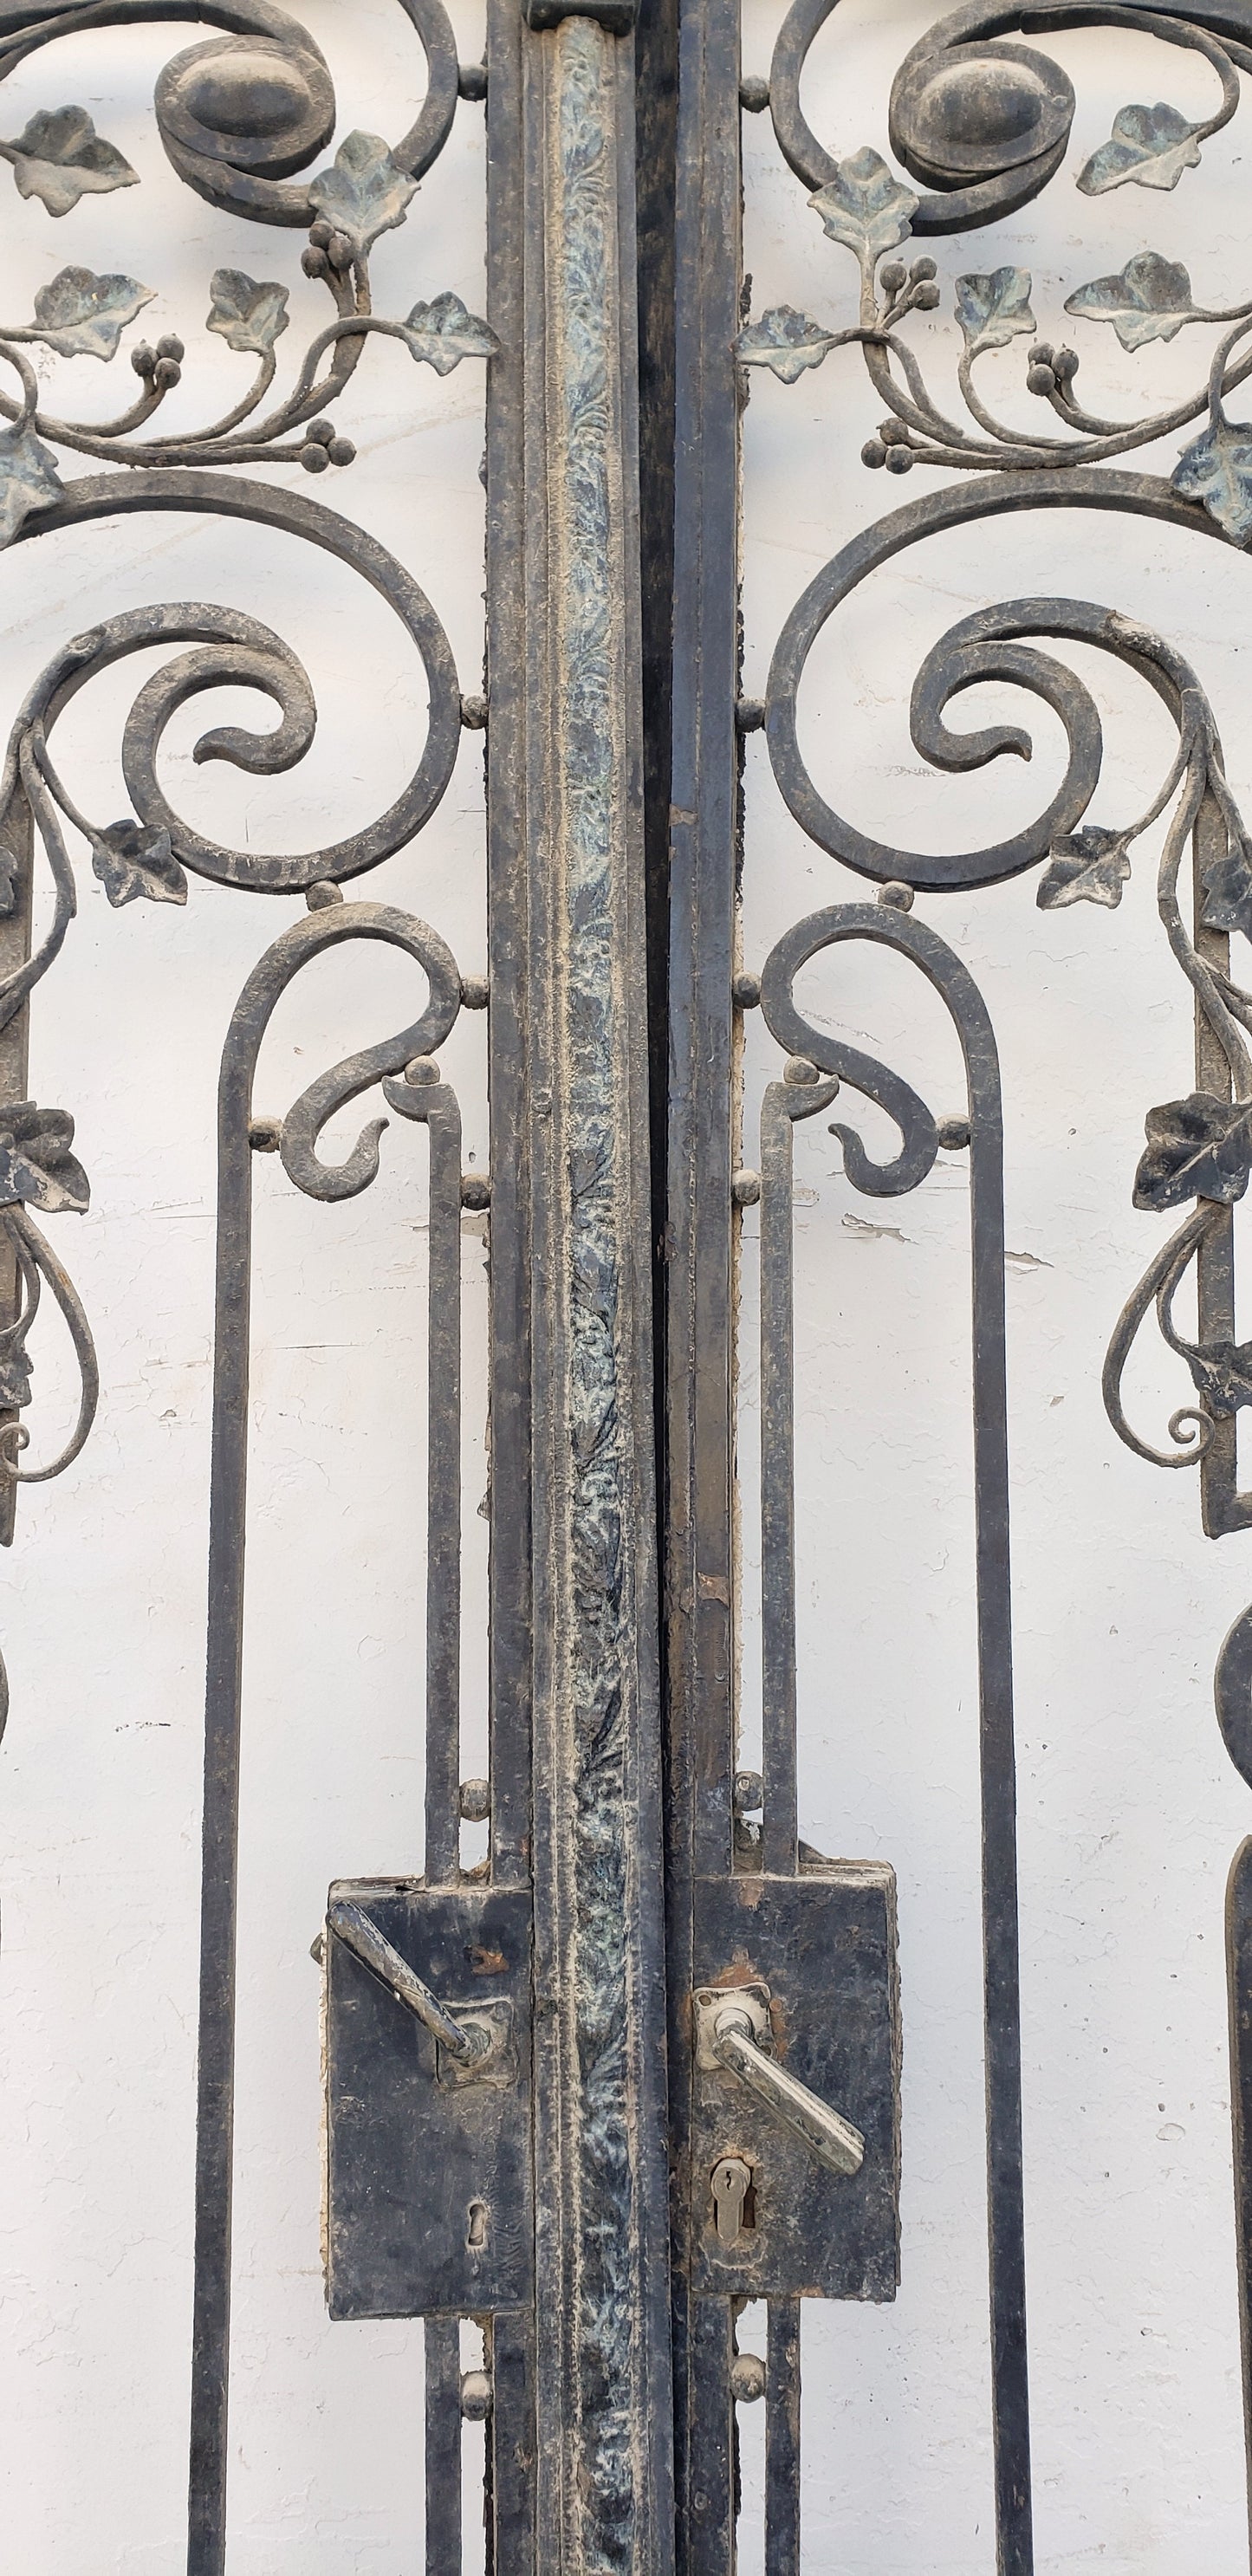 Pair of Ornate Iron Gates with Top Panel